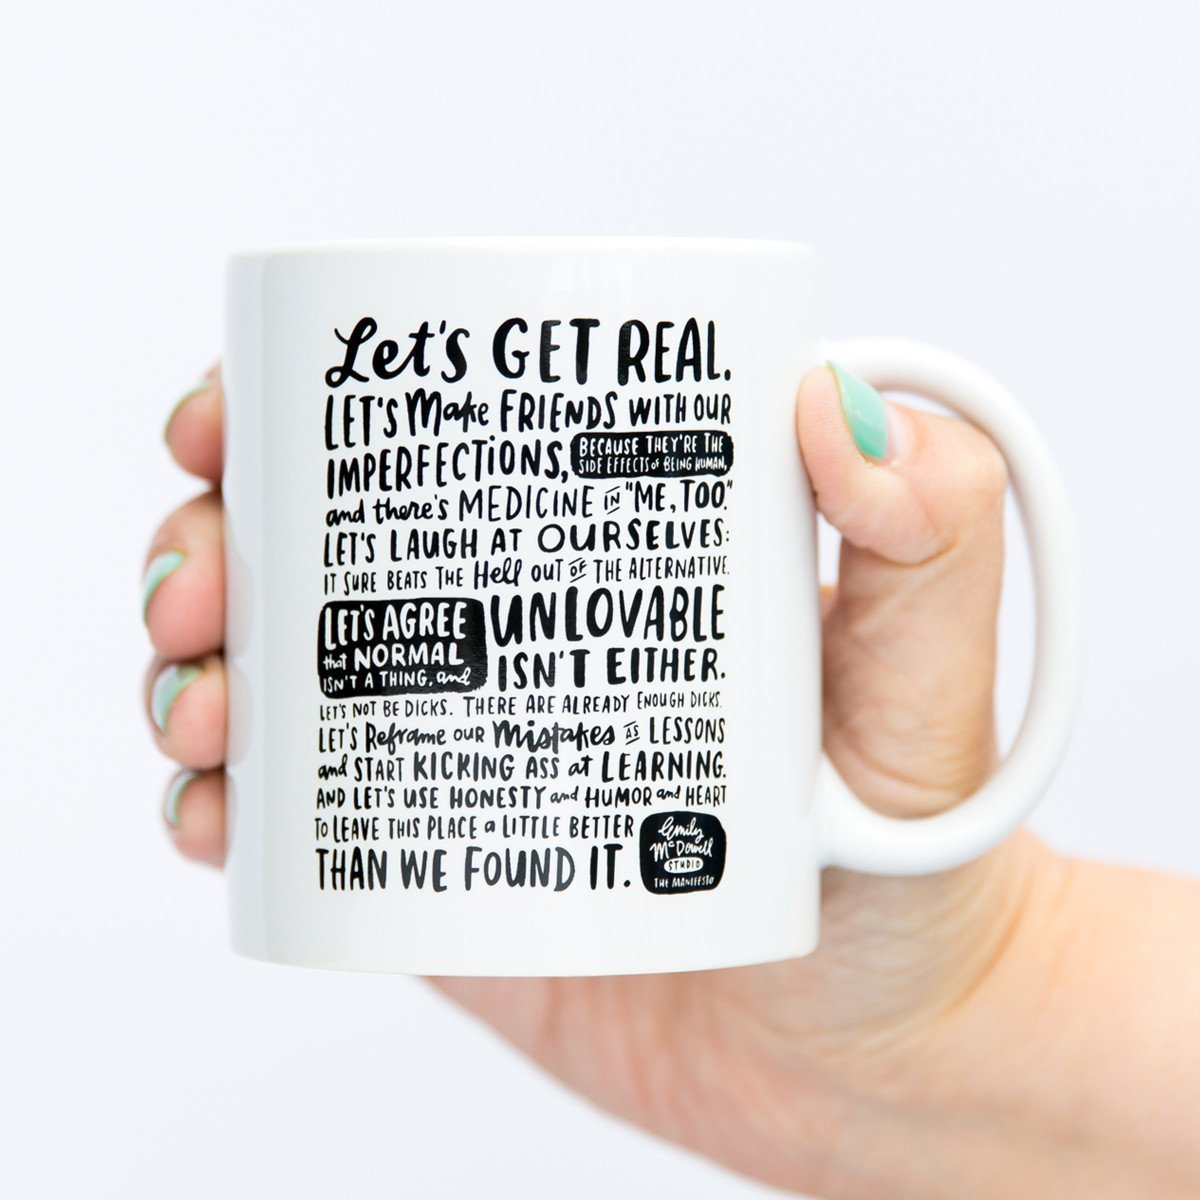 Inspirational mugs that aren't cheesy: Mantra Mug by Emily McDowell